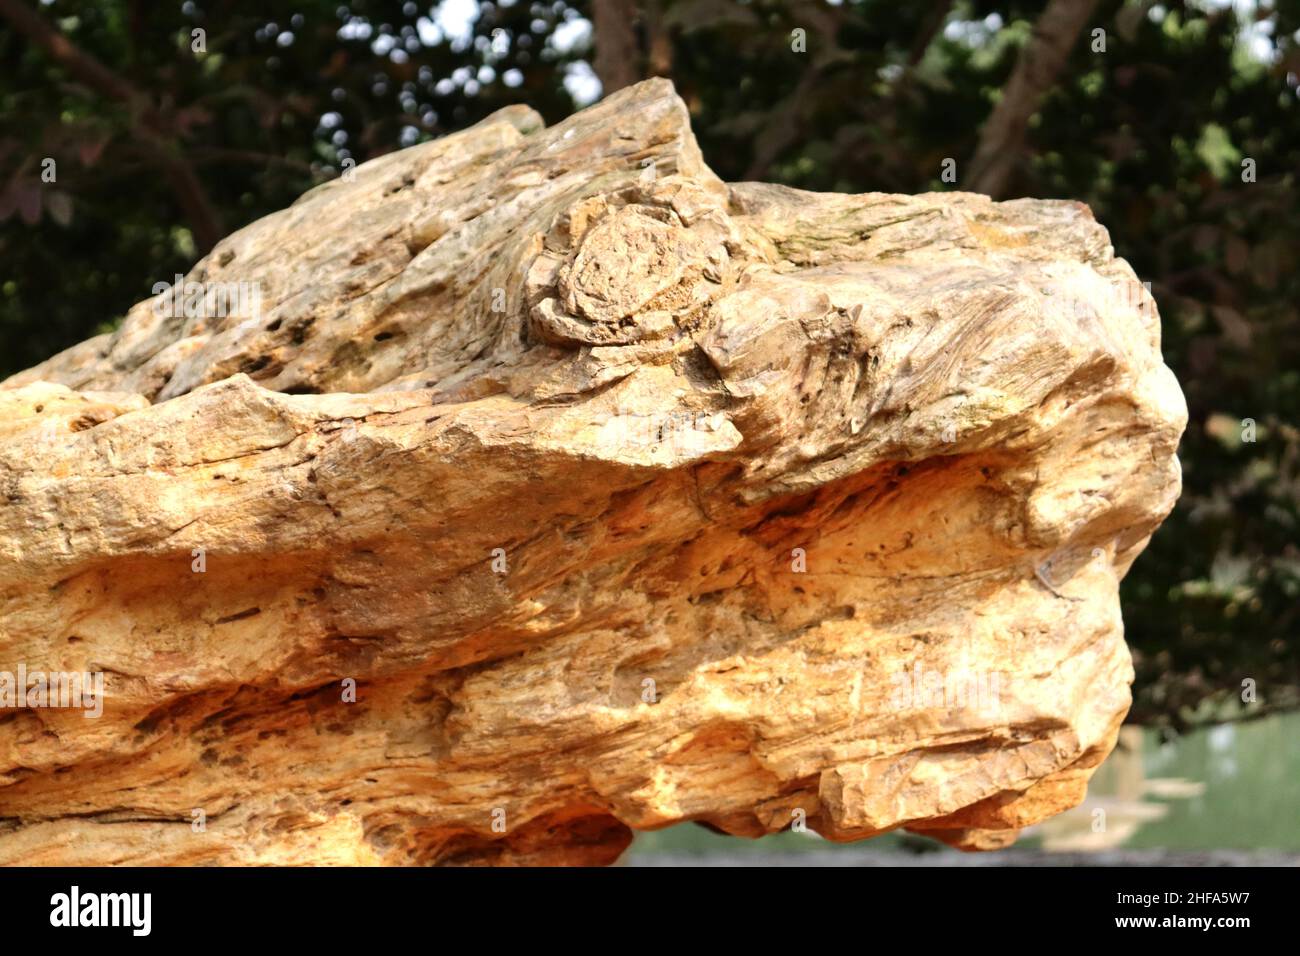 Fossil wood,Petrified wood are fossils of wood that have turned to stone through the process of permineralization,Million of years old tree form stone Stock Photo